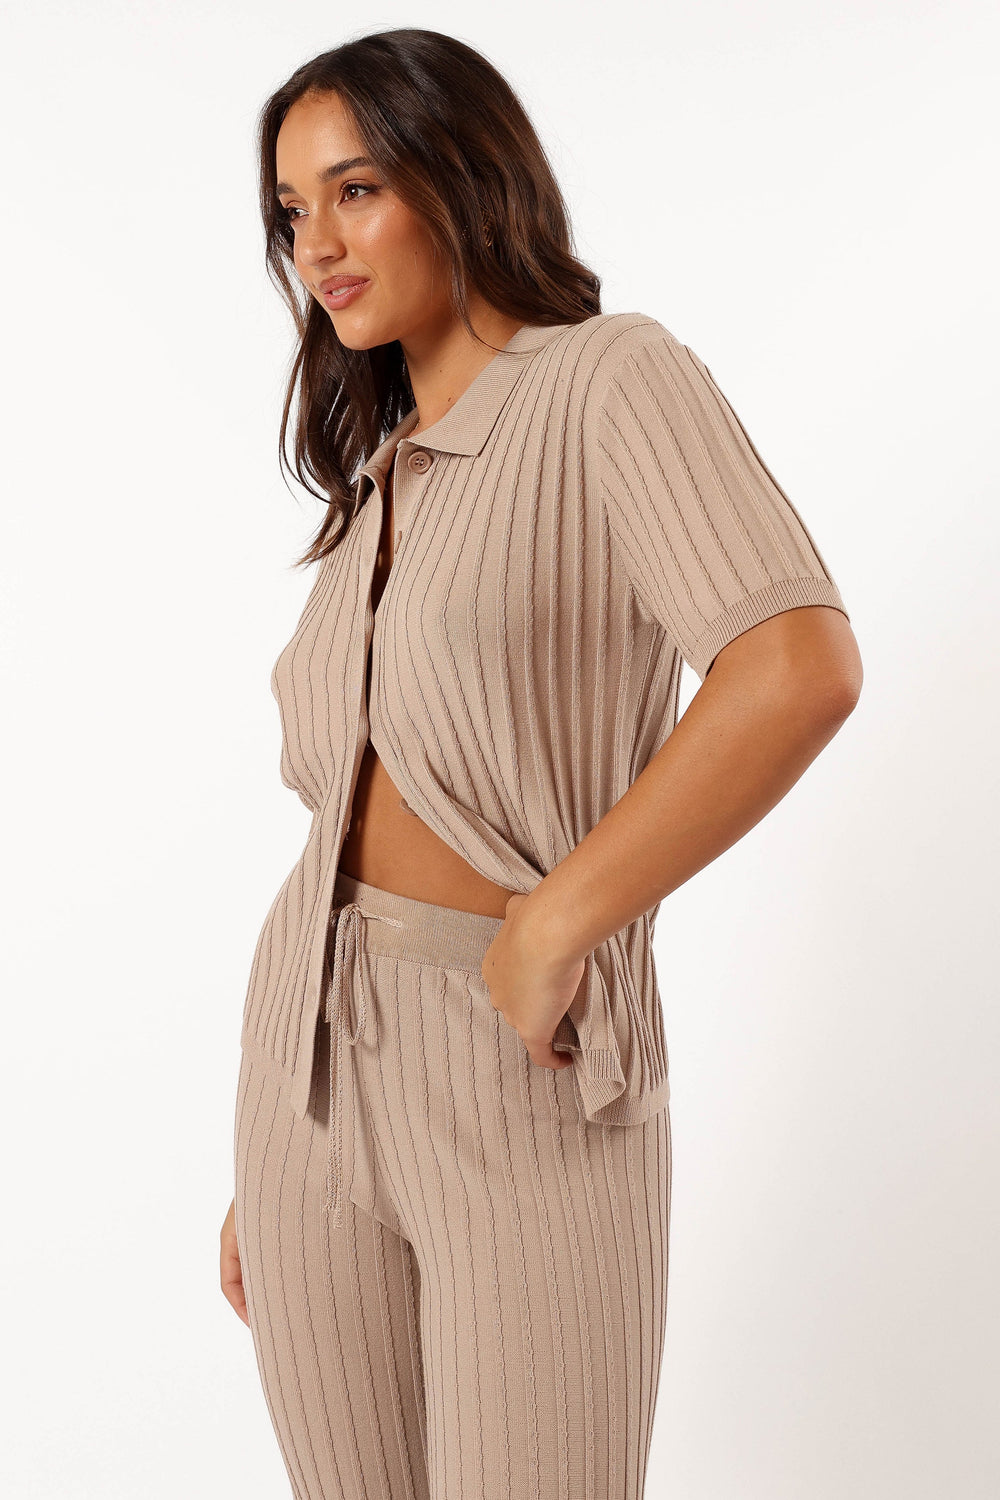 TOPS @Tibi Ribbed Top - Beige (Hold for Cool Beginnings)